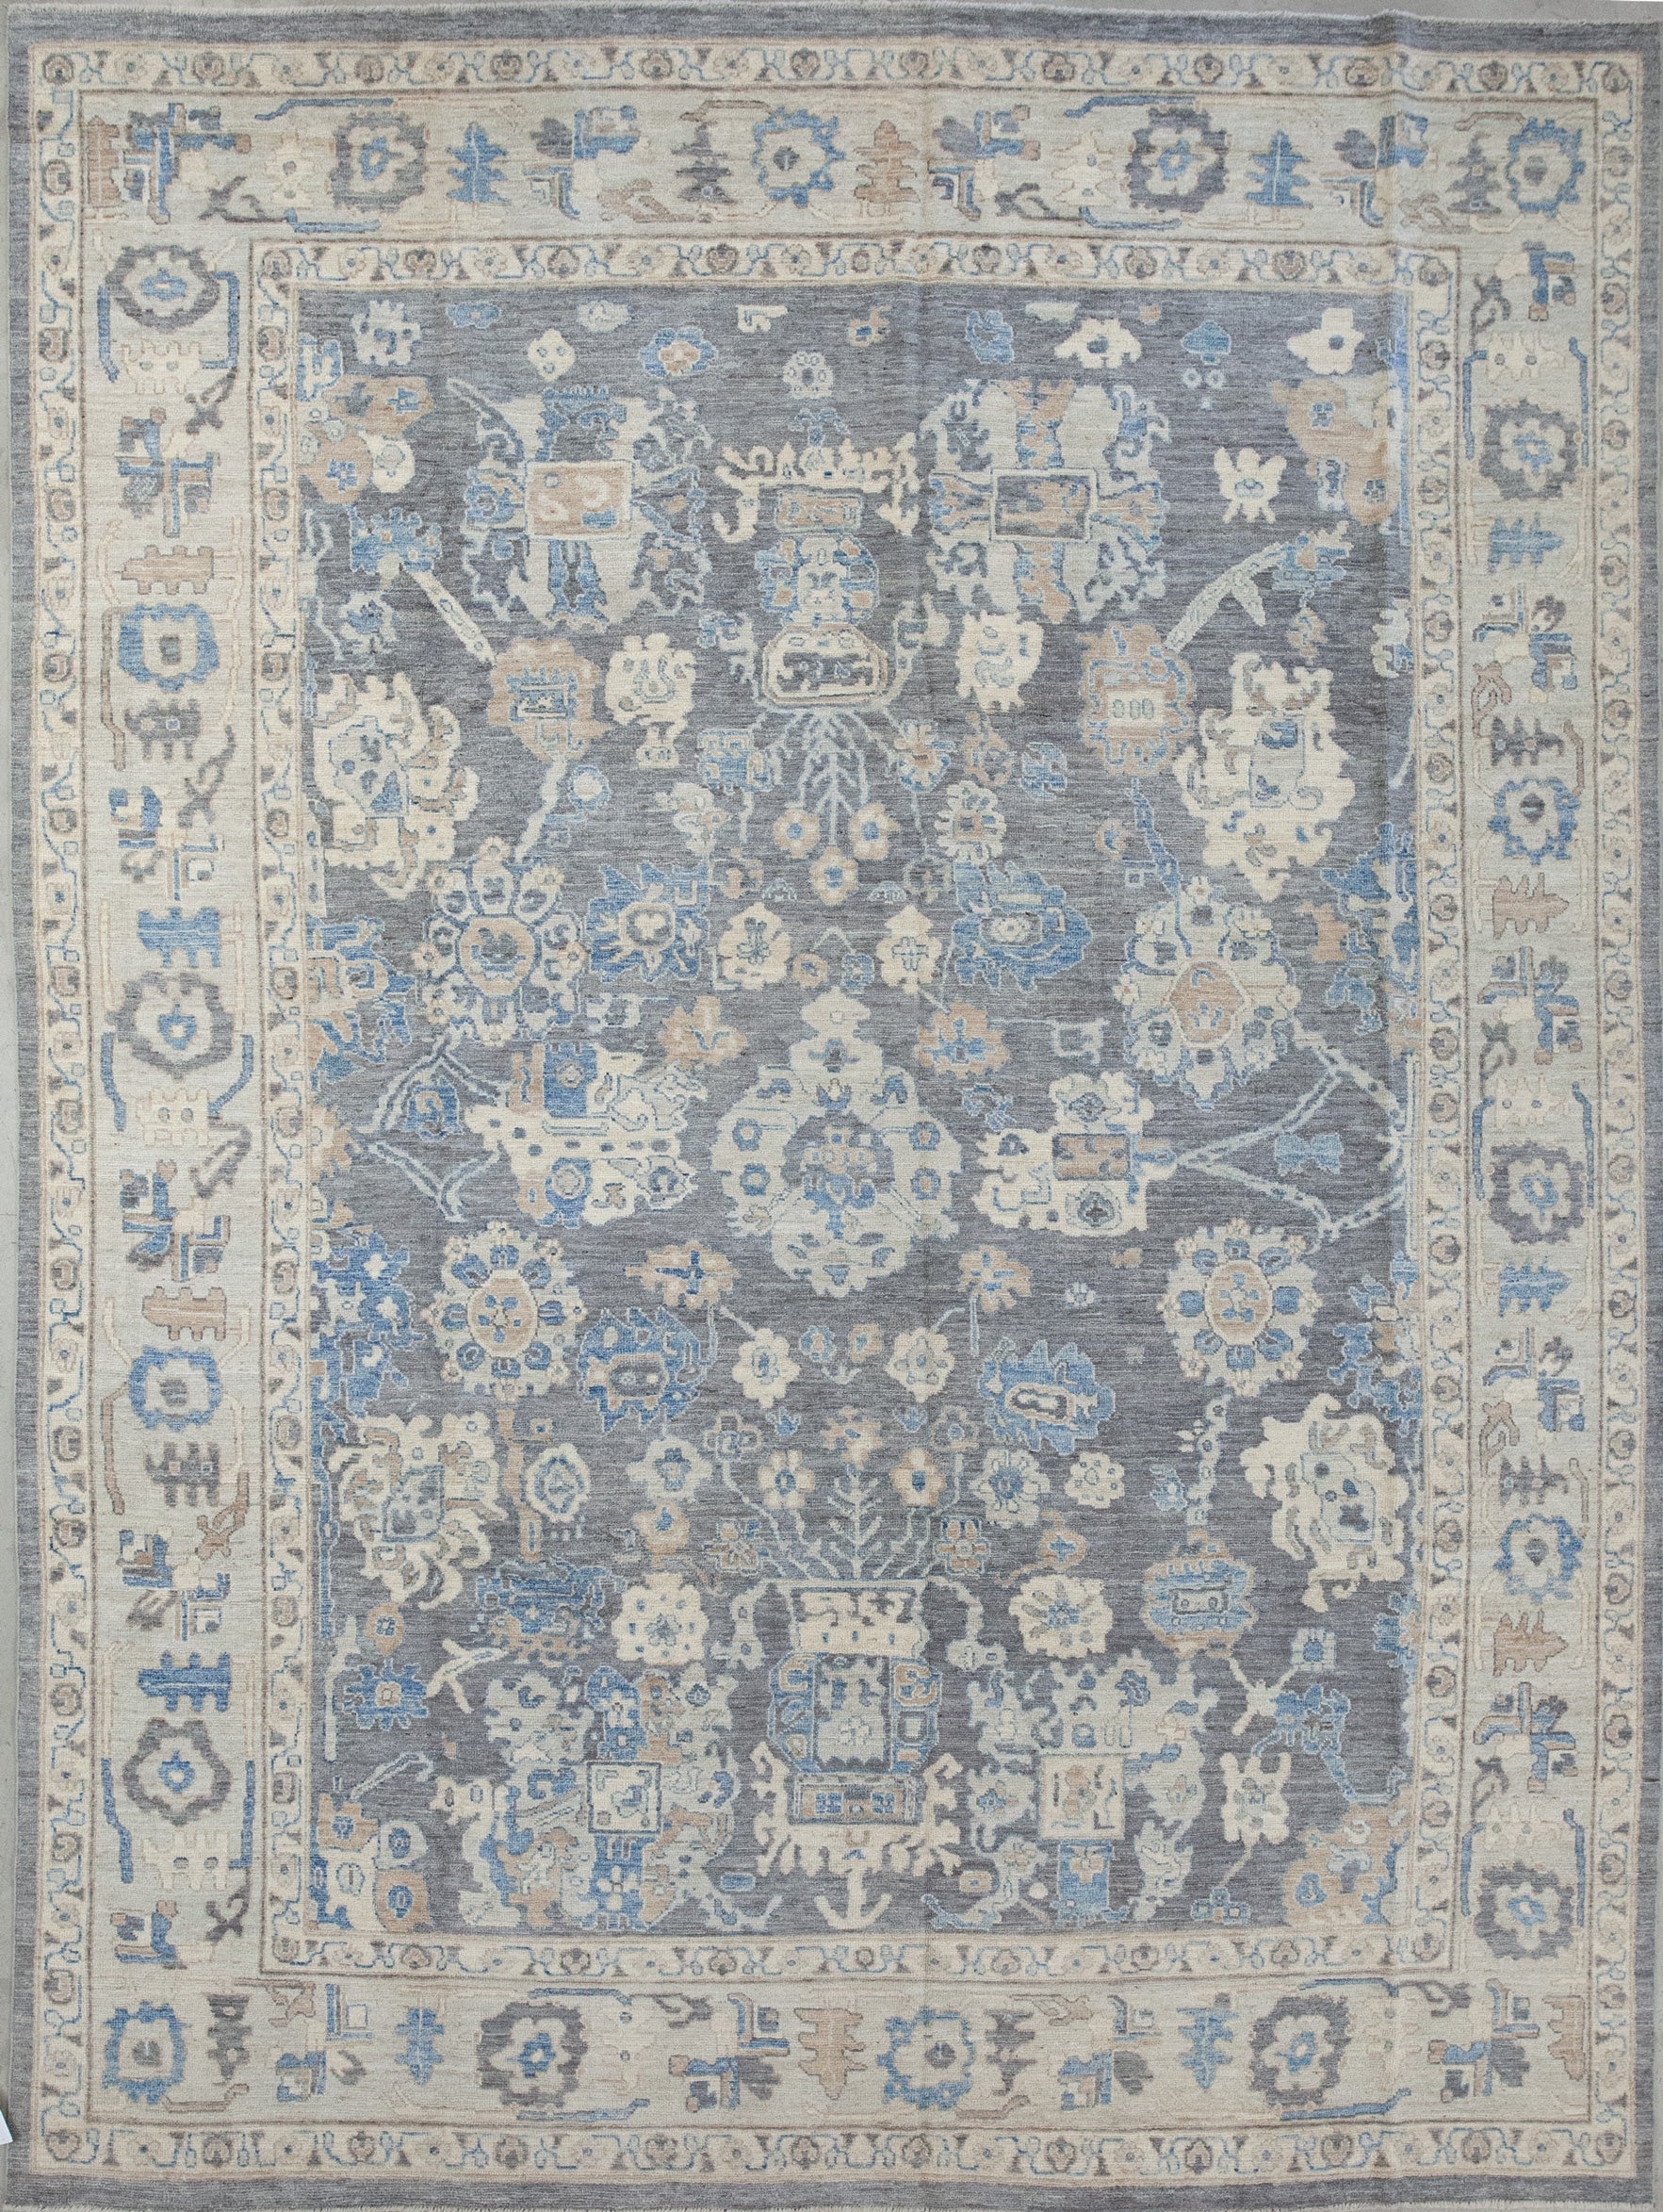 Classic rug comes with a sober color scheme which has gray, brownish, beige, and blue accents. The design renders abstract corals, flowers, and shields. 